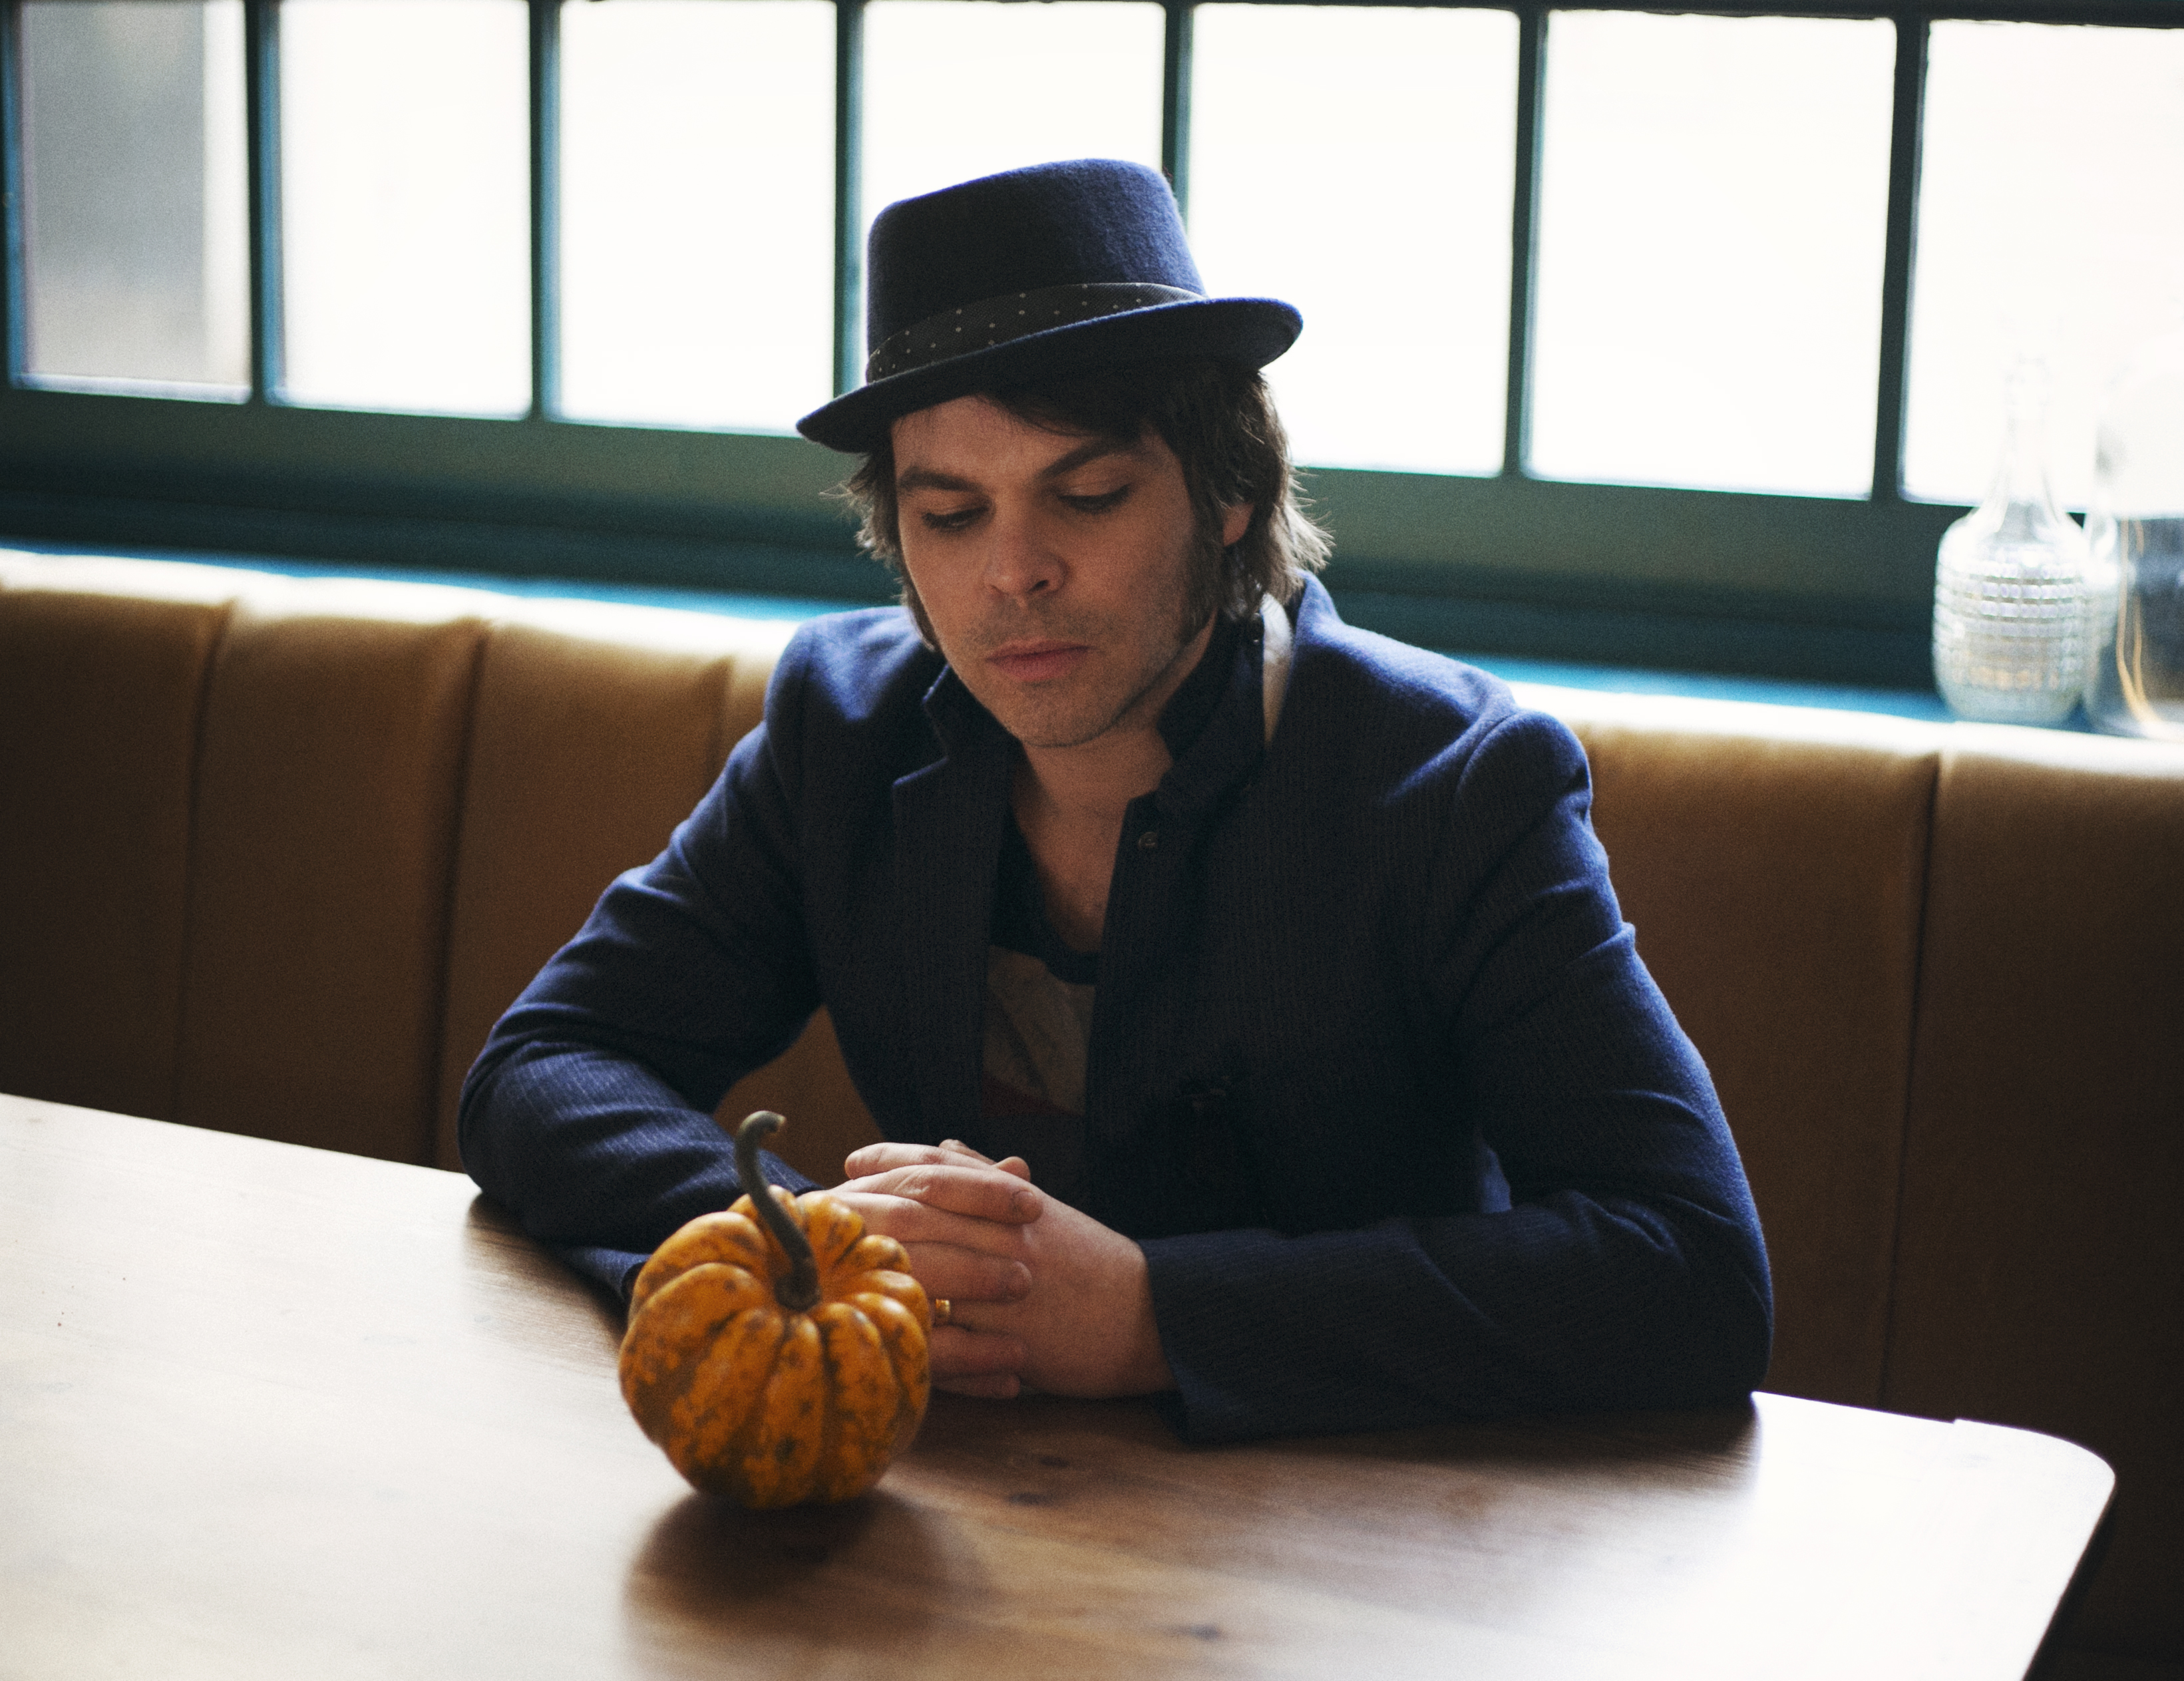 Gaz Coombes: “The creative process is an ongoing battle between self-doubt and confidence”